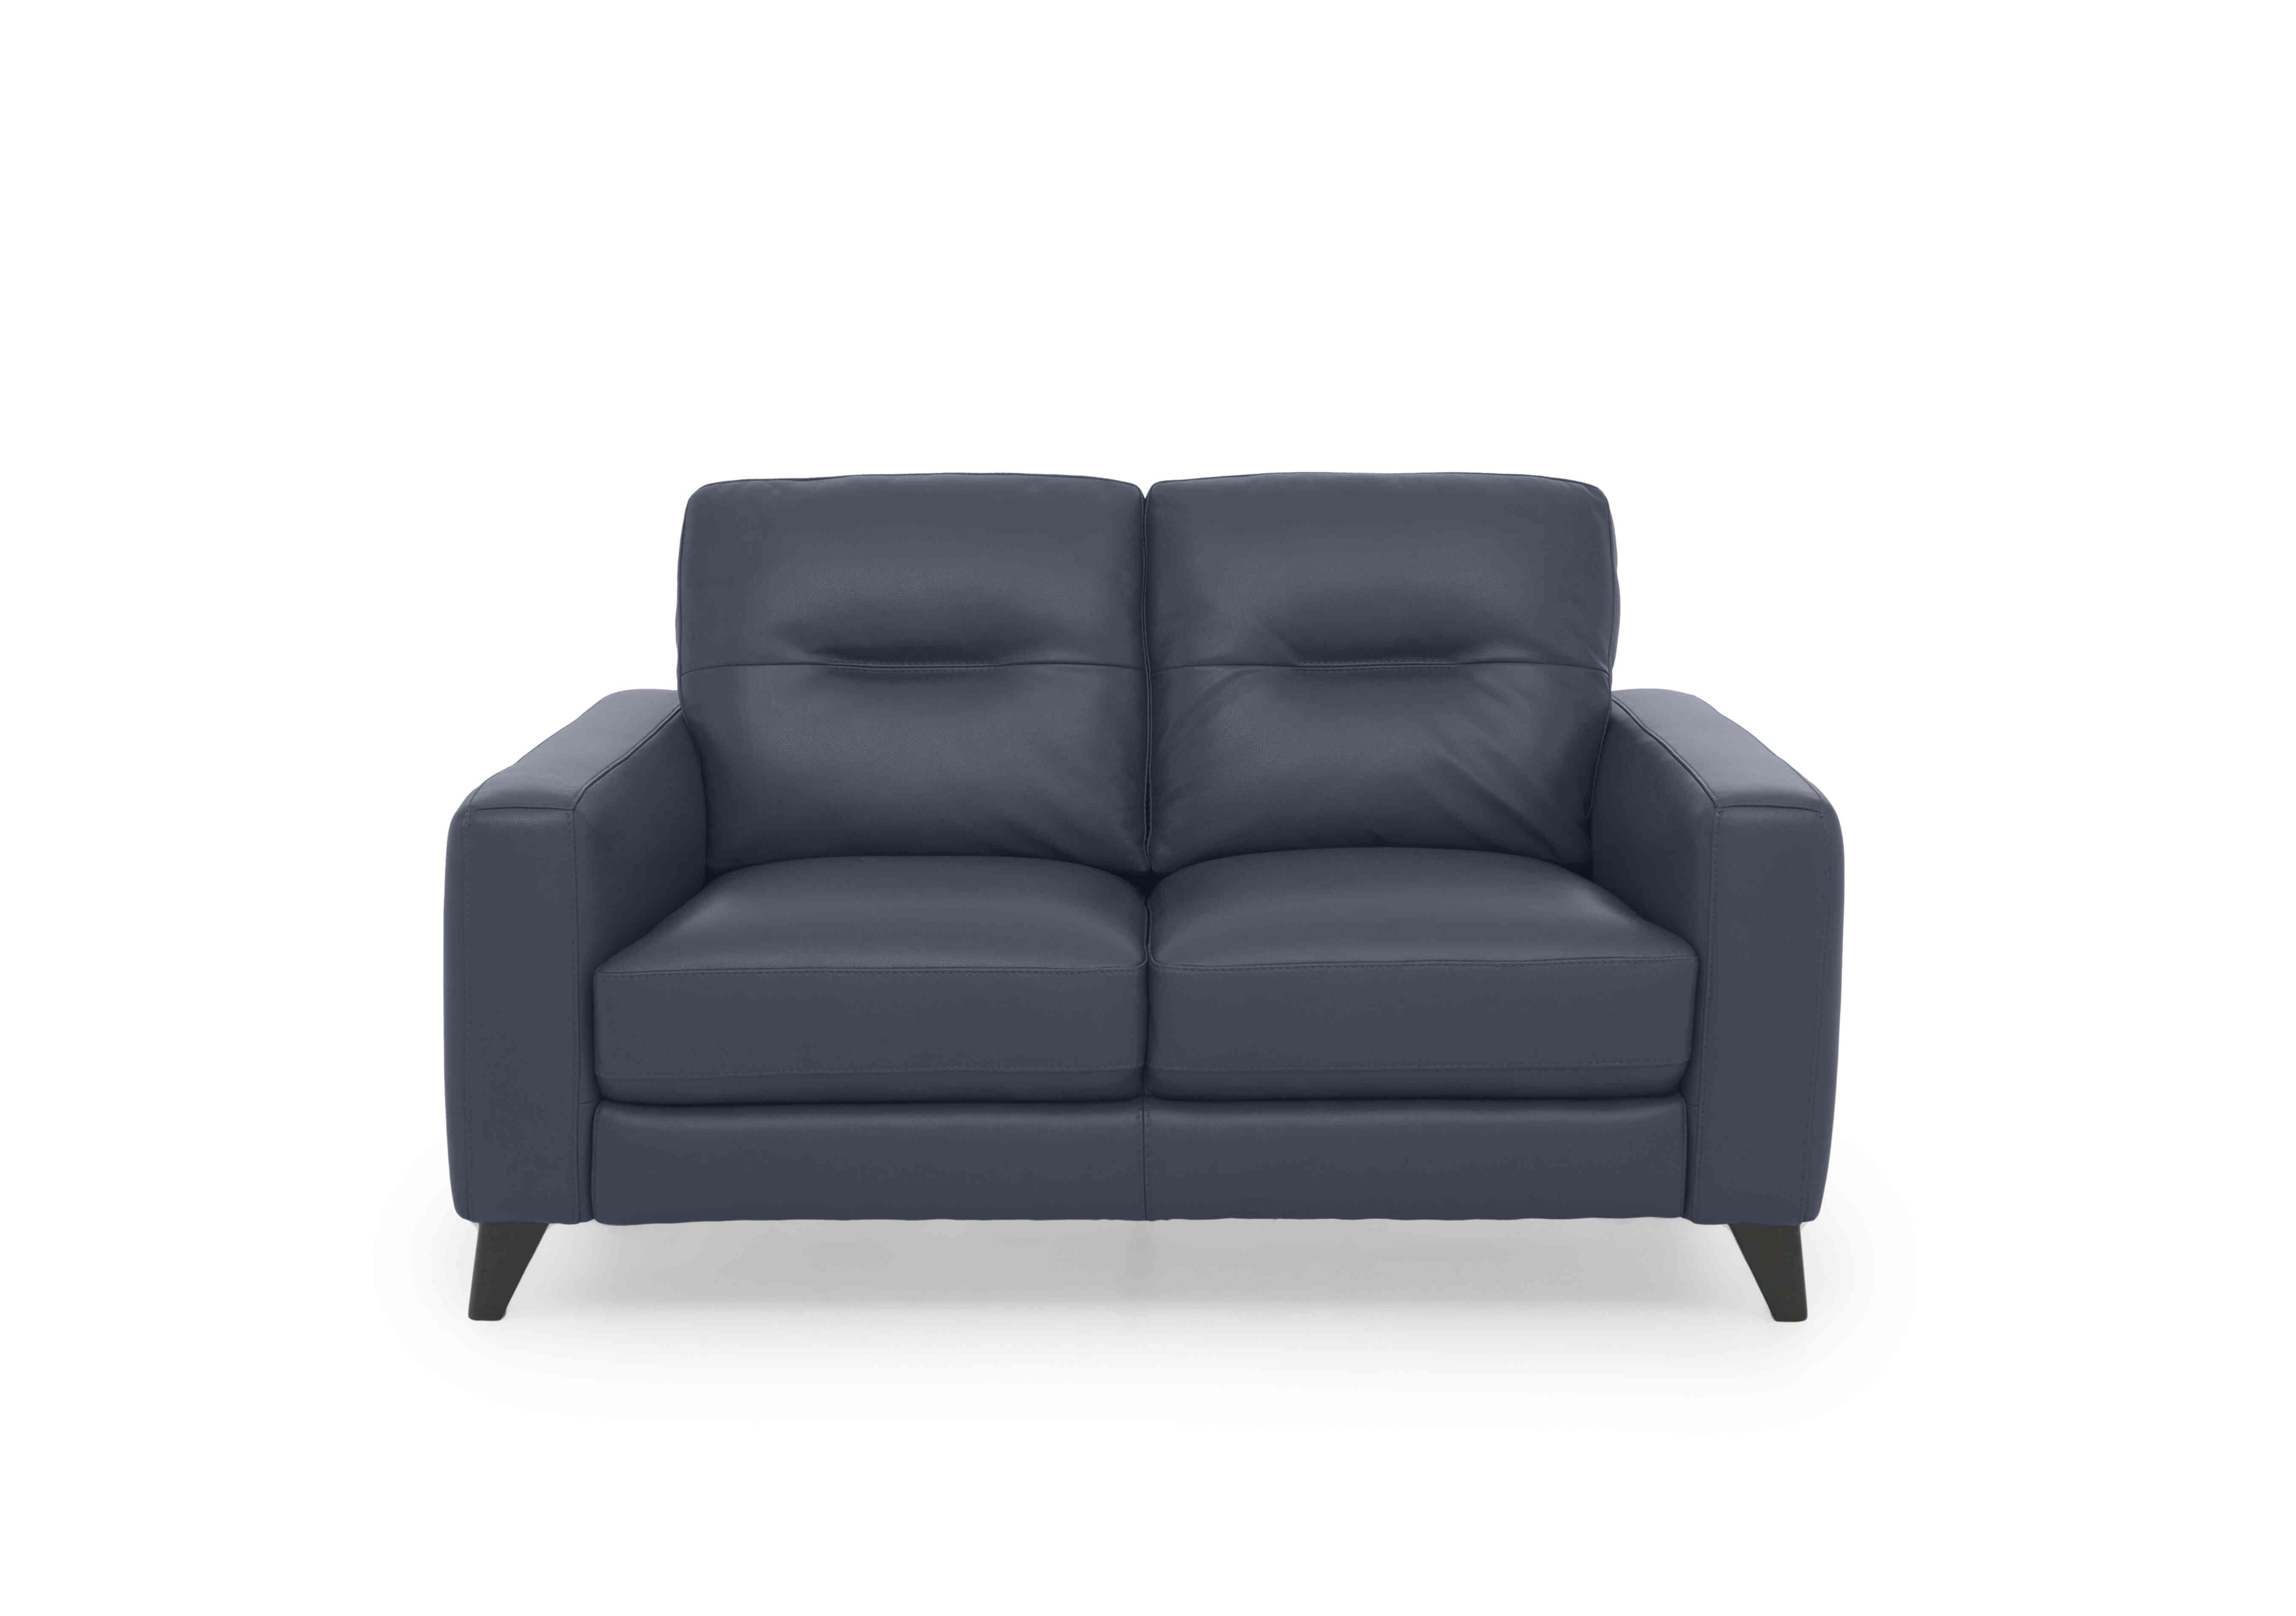 Jules 2 Seater Leather Sofa in Bv-313e Ocean Blue on Furniture Village